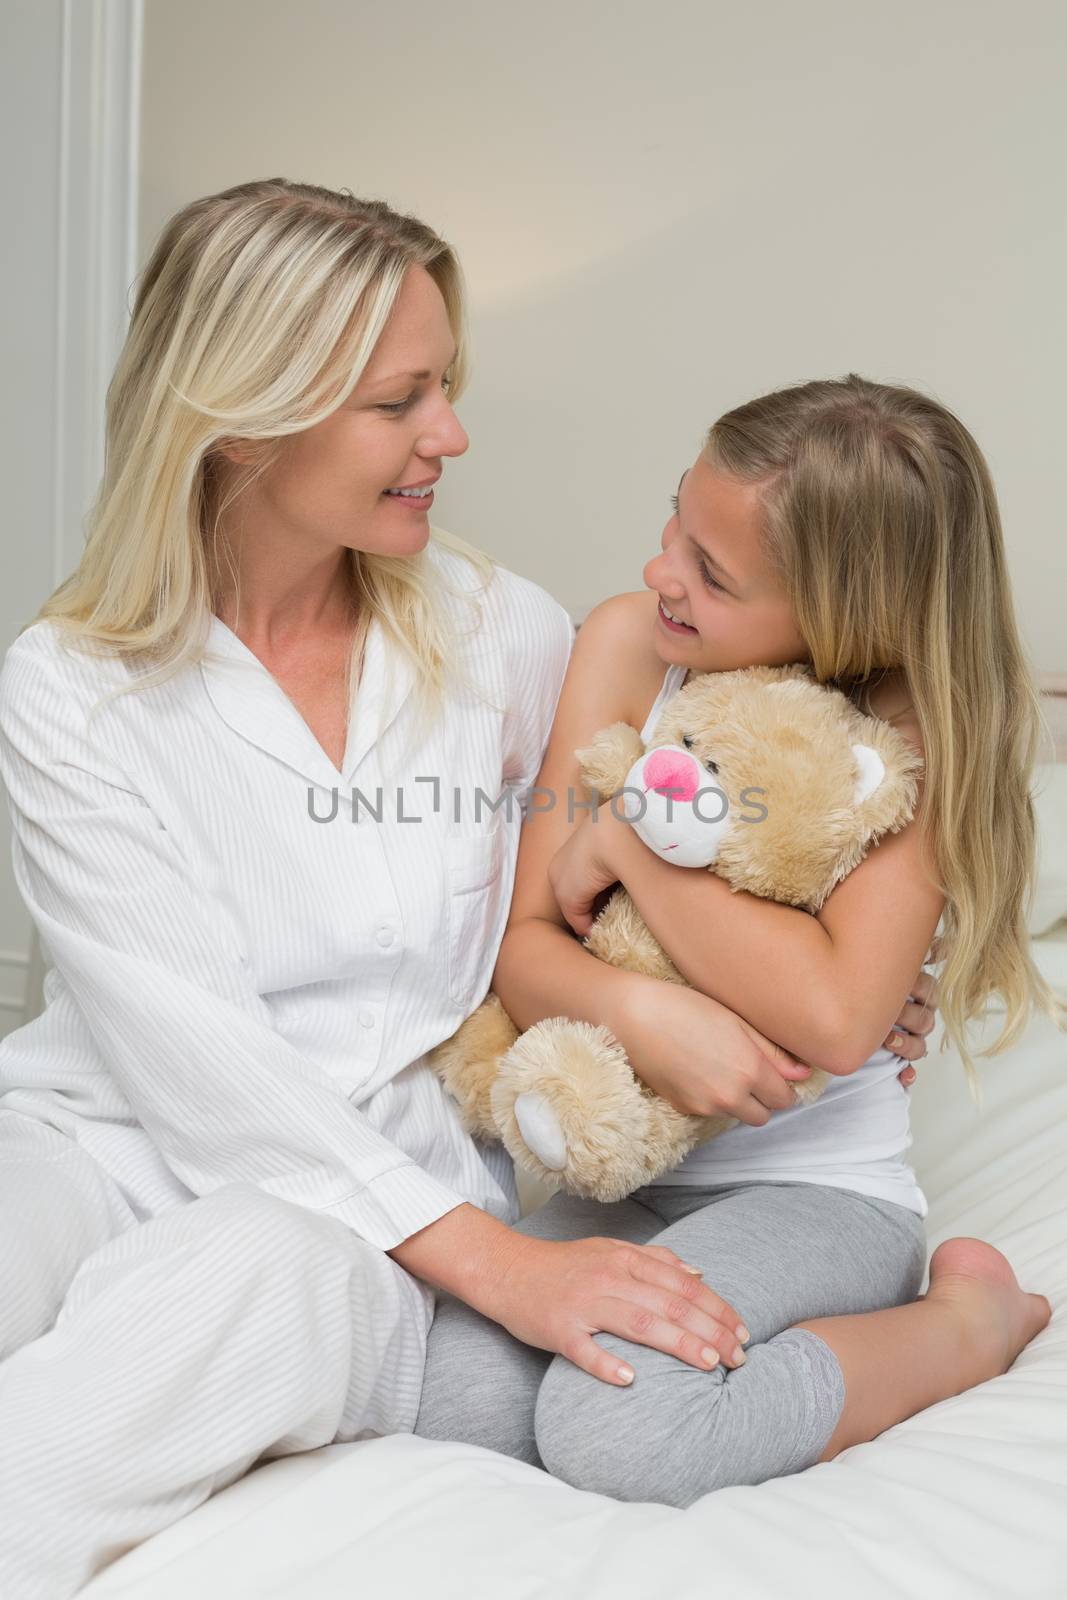 Girl embracing teddy bear while looking at mother in bed by Wavebreakmedia